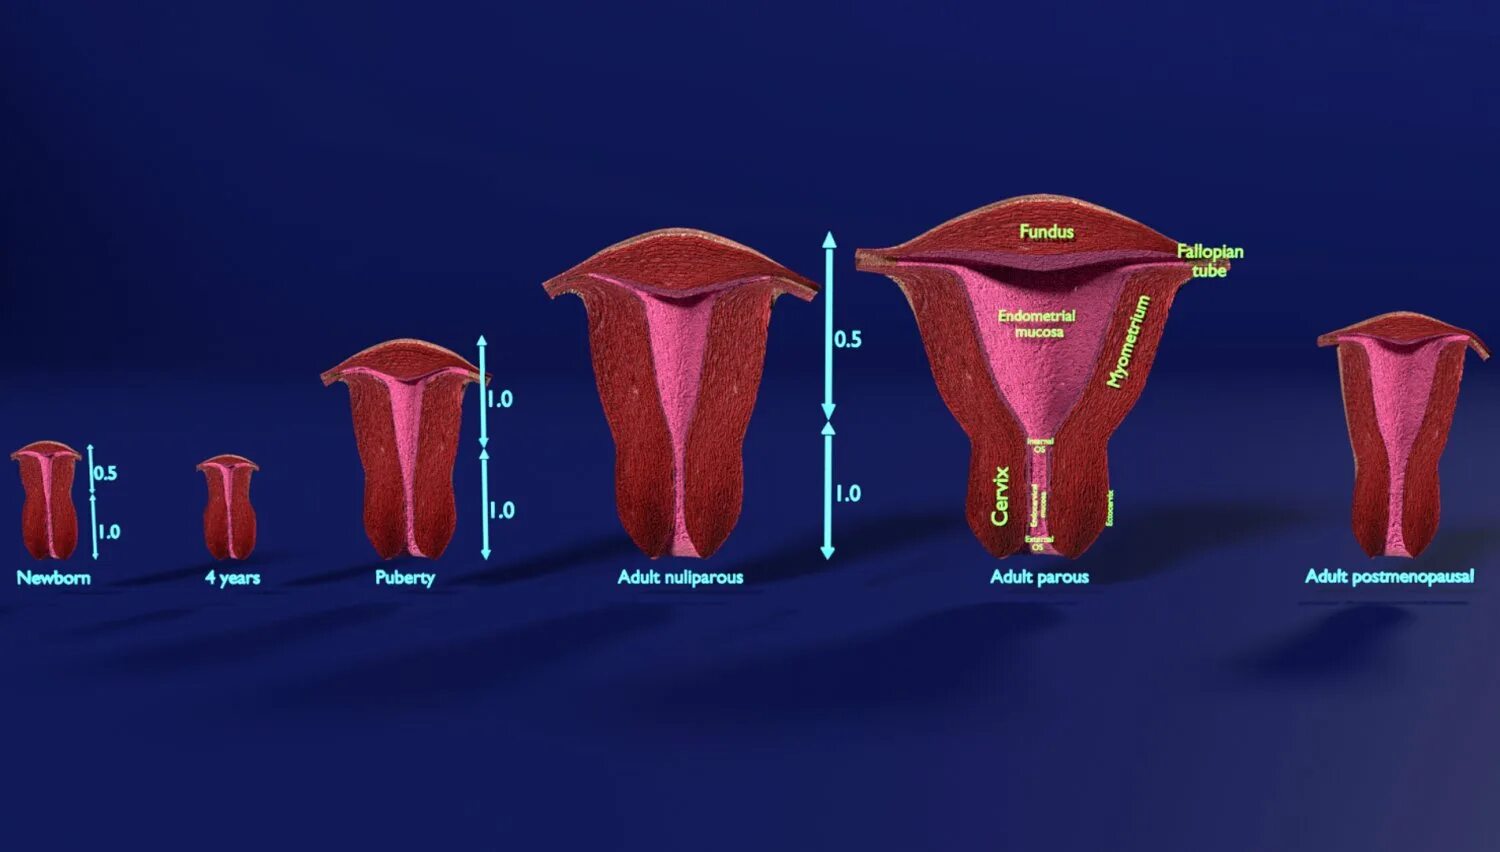 Матка 3д модель. Visual 3d model of the uterus. Different stages